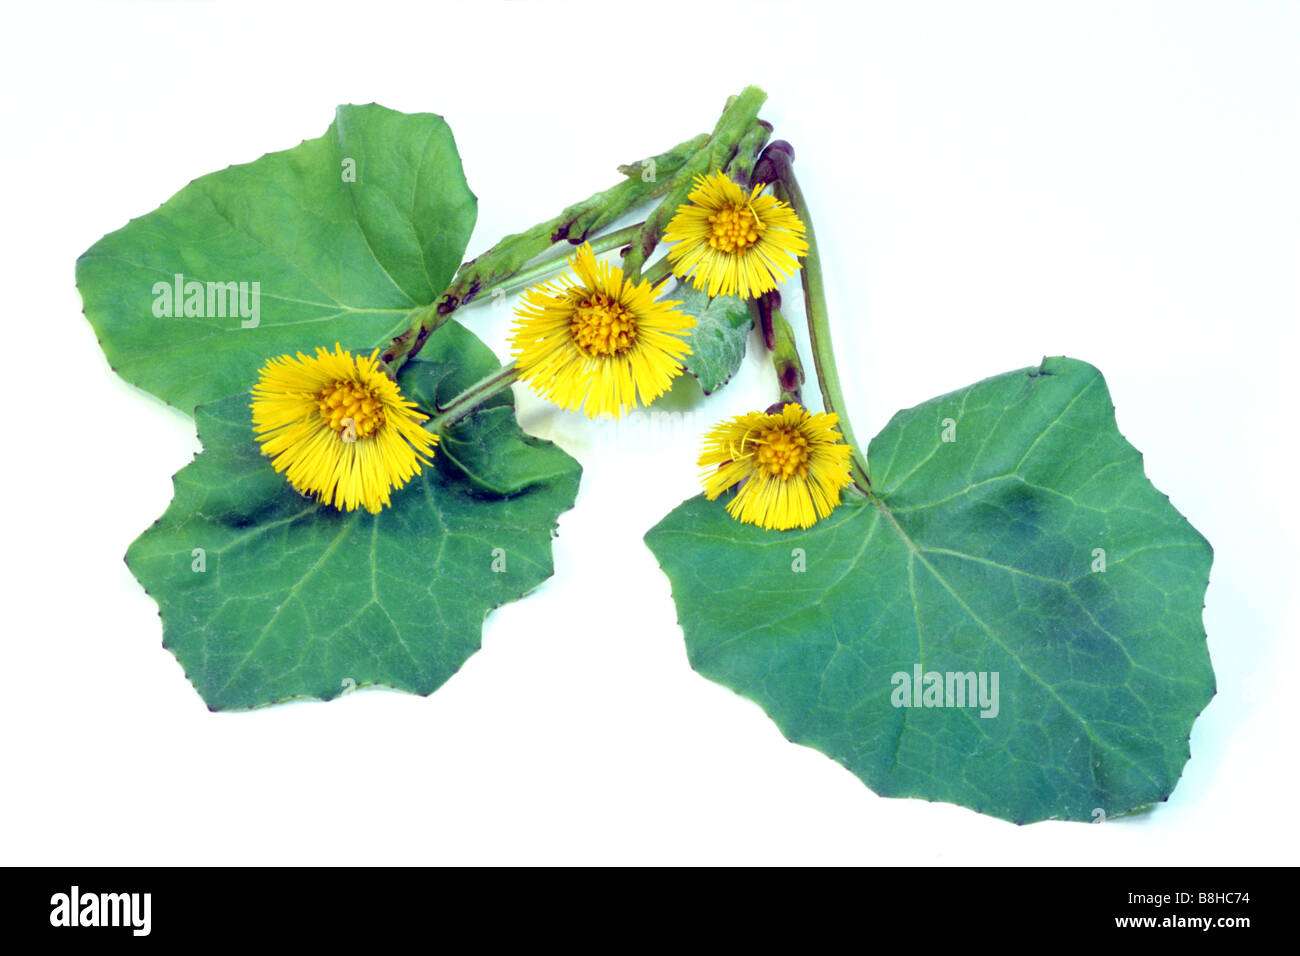 Coltsfoot (Tussilago farfara), flowers and leaves, studio picture Stock Photo